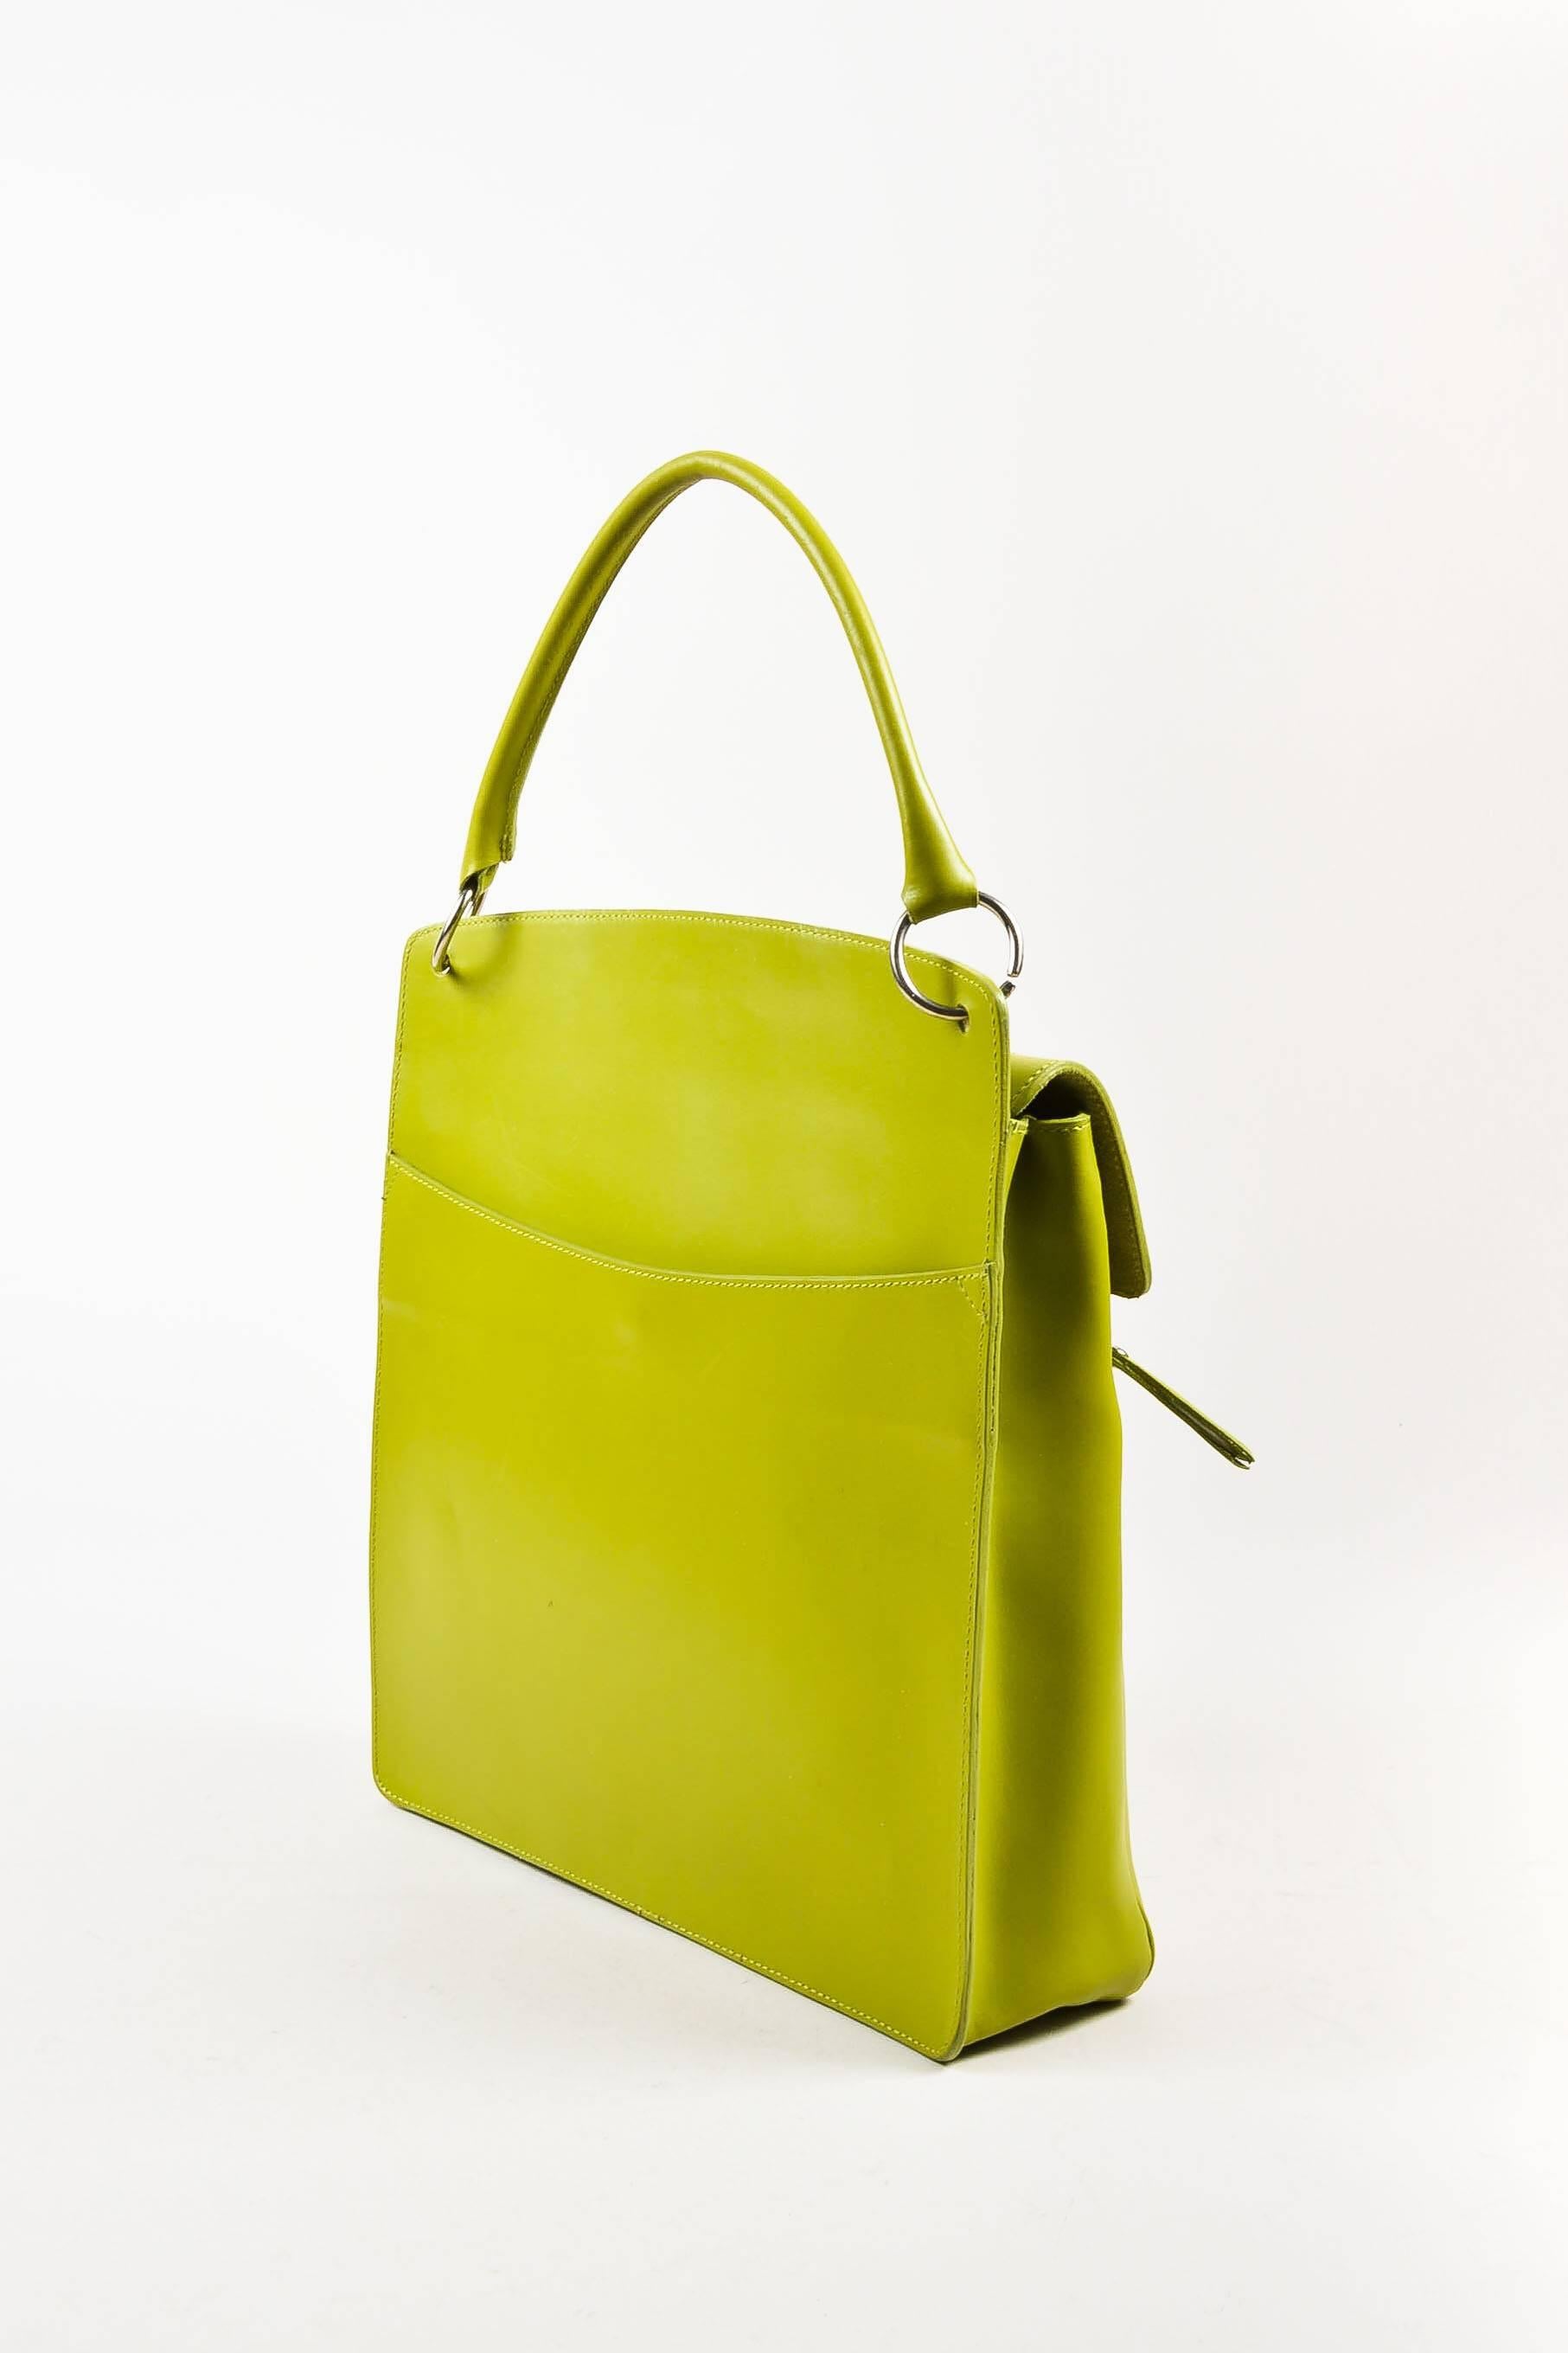 Vintage bag in a lighthearted hue featuring a single rolled top handle with golden metallic O-rings, a front flap with an enameled twist-lock closure, a front zipped pocket, and a snapped back pocket. Tonal stitching & piping. Flat